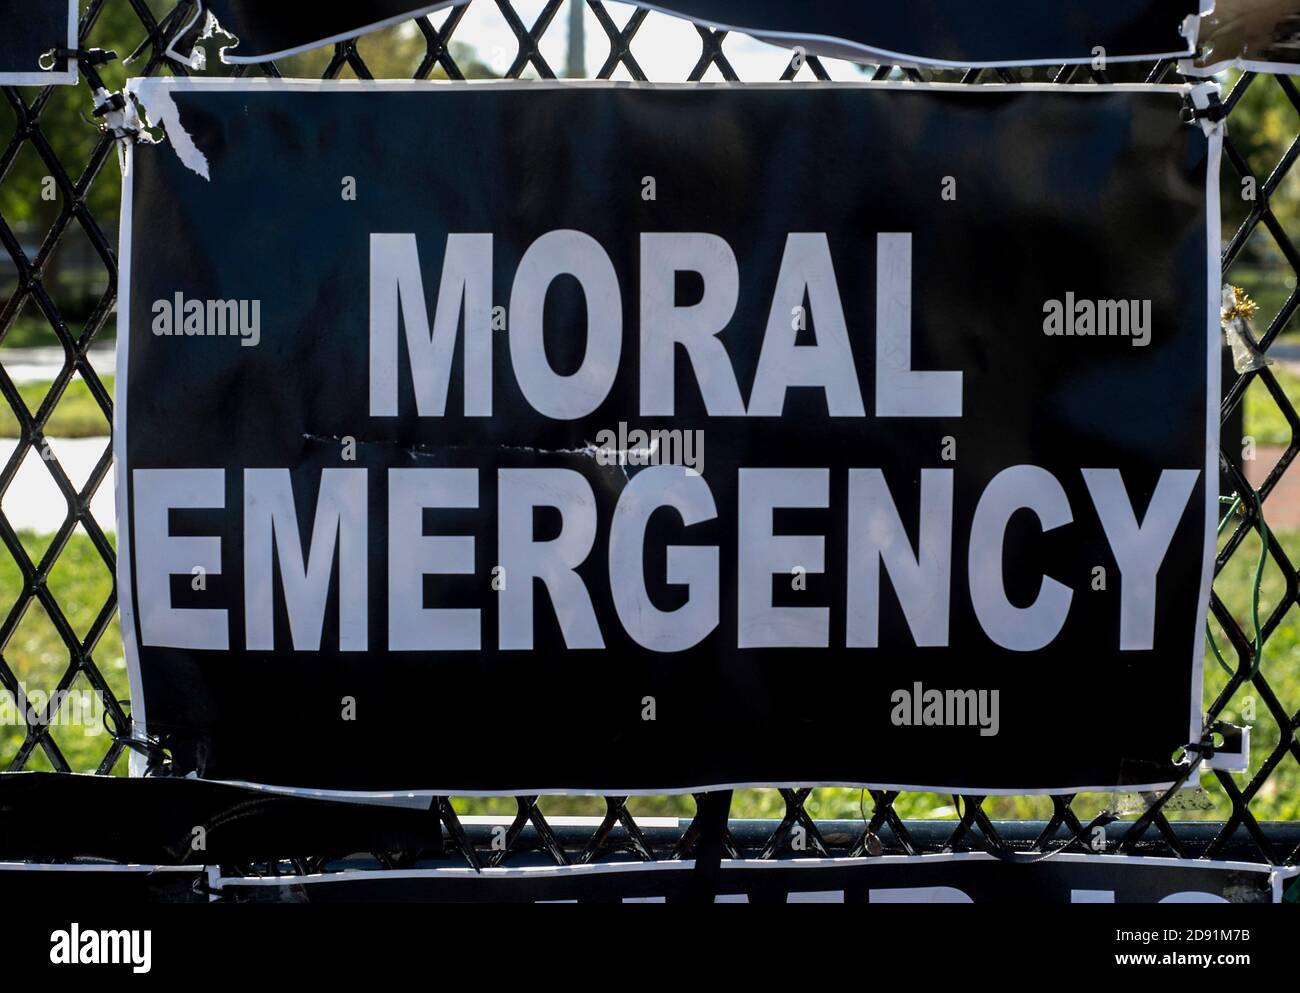 November 02, 2020, Washington, District of Columbia, USA - With one day to go until the 2020 general election, signs in and around Black Lives Matter Plaza speak to the resistance to Trumpism and what is at stake in the election.(Credit Image: © Brian Cahn/ZUMA Wire) Stock Photo